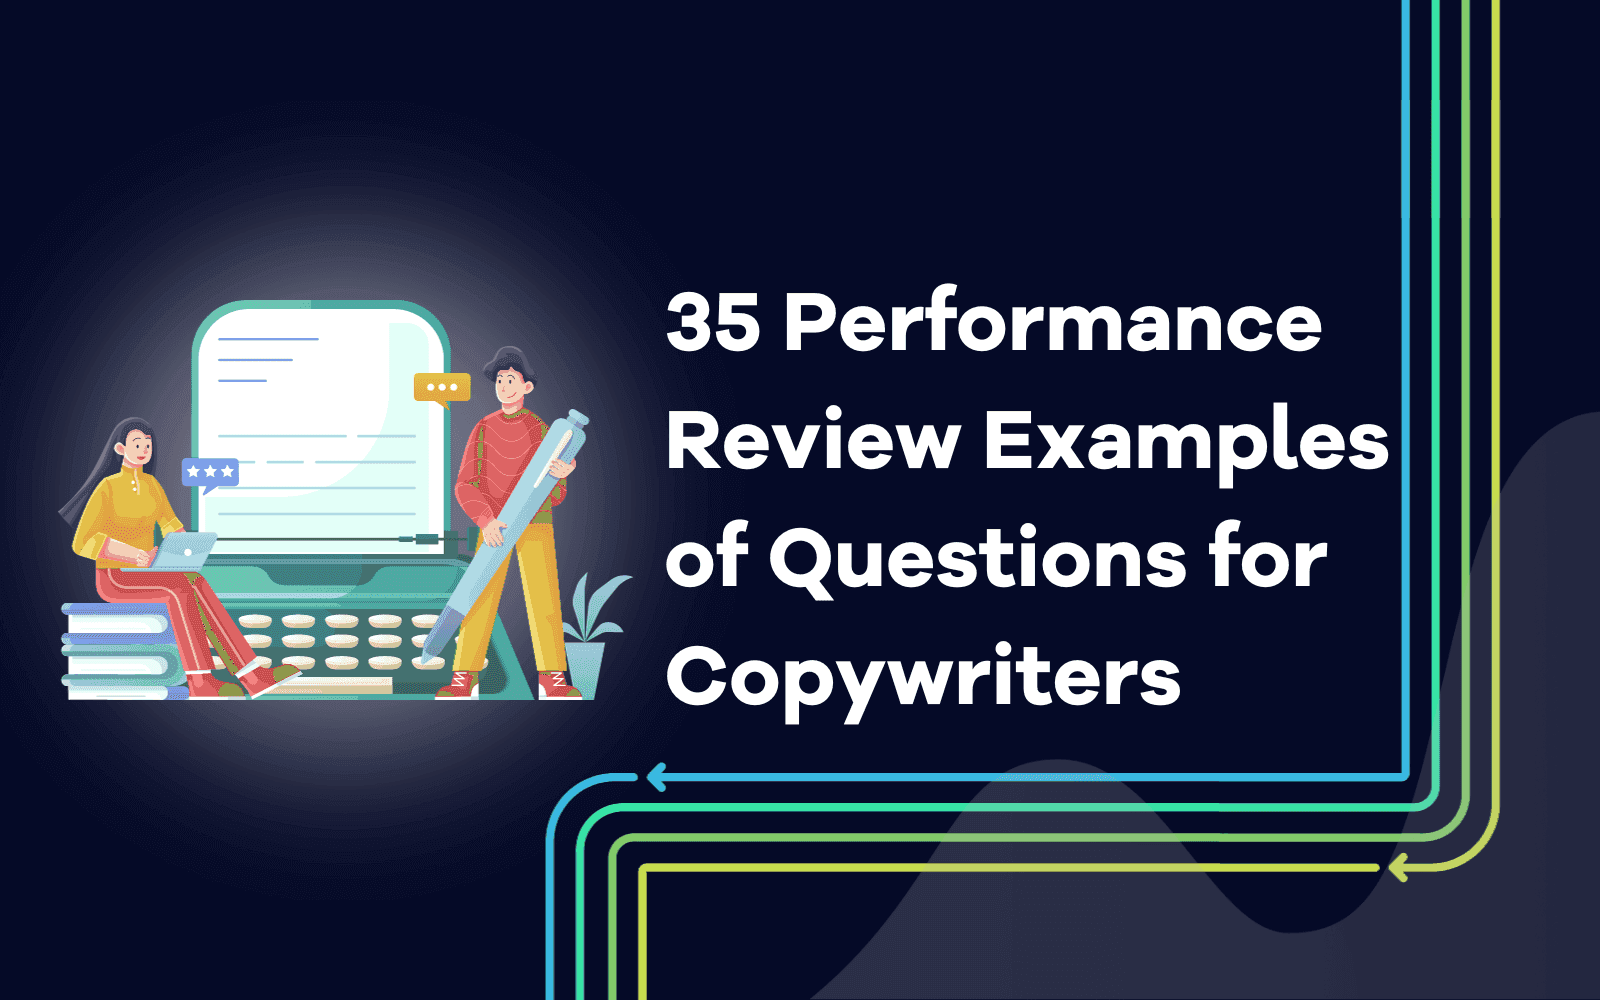 Performance Review Examples of Questions for Copywriters